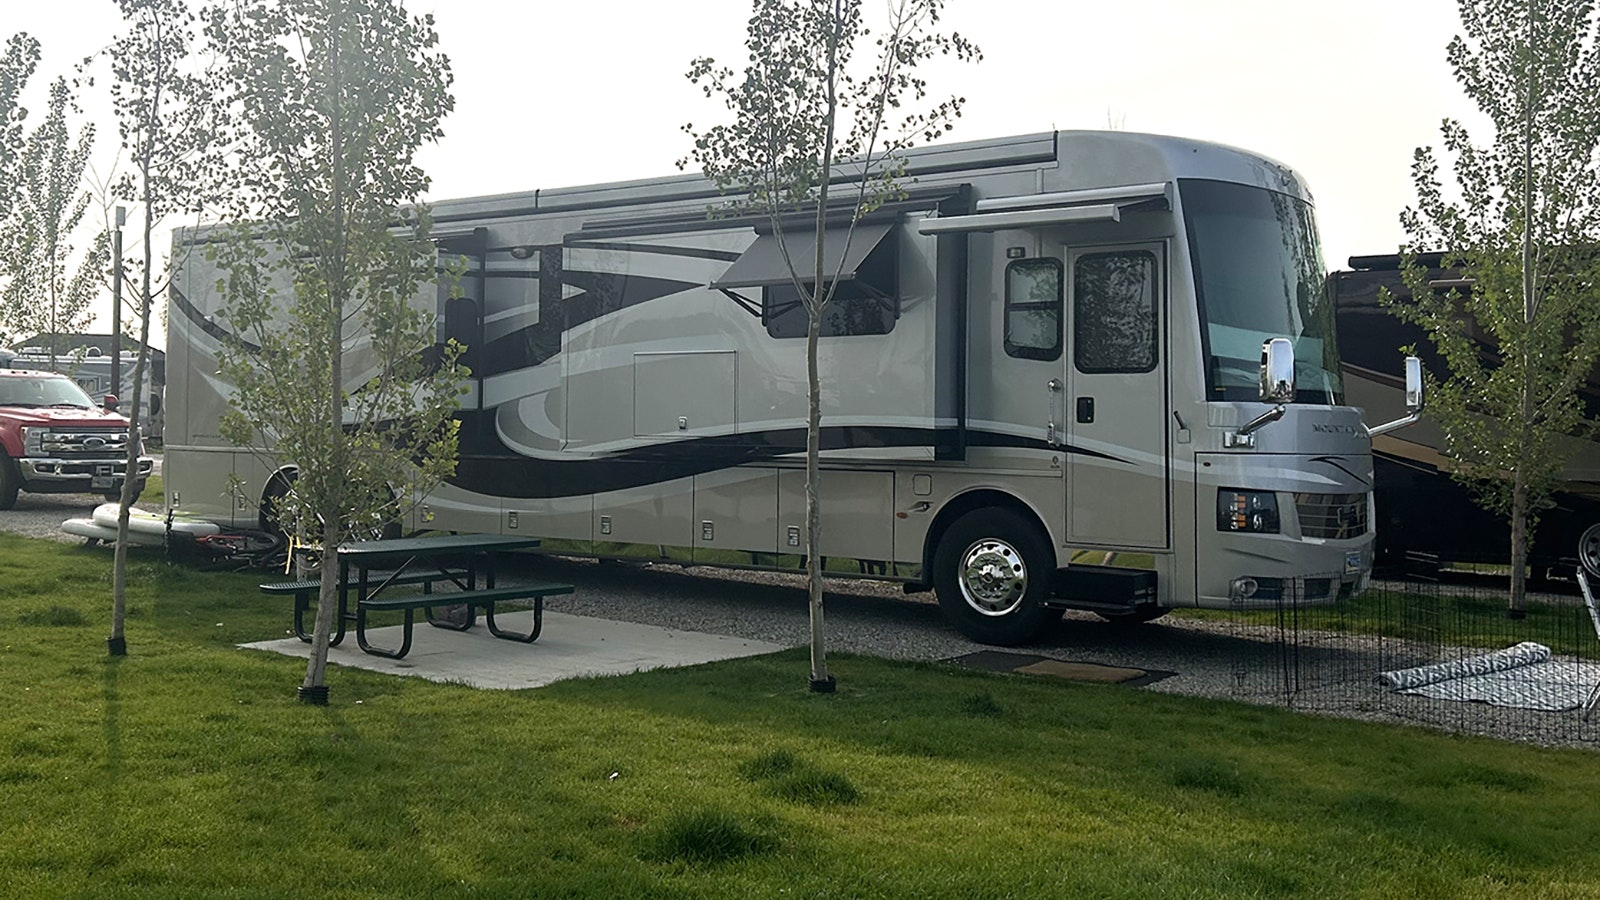 A Newmar Mountain Aire valued at around $600,000 is parked in a campground in Pinedale.